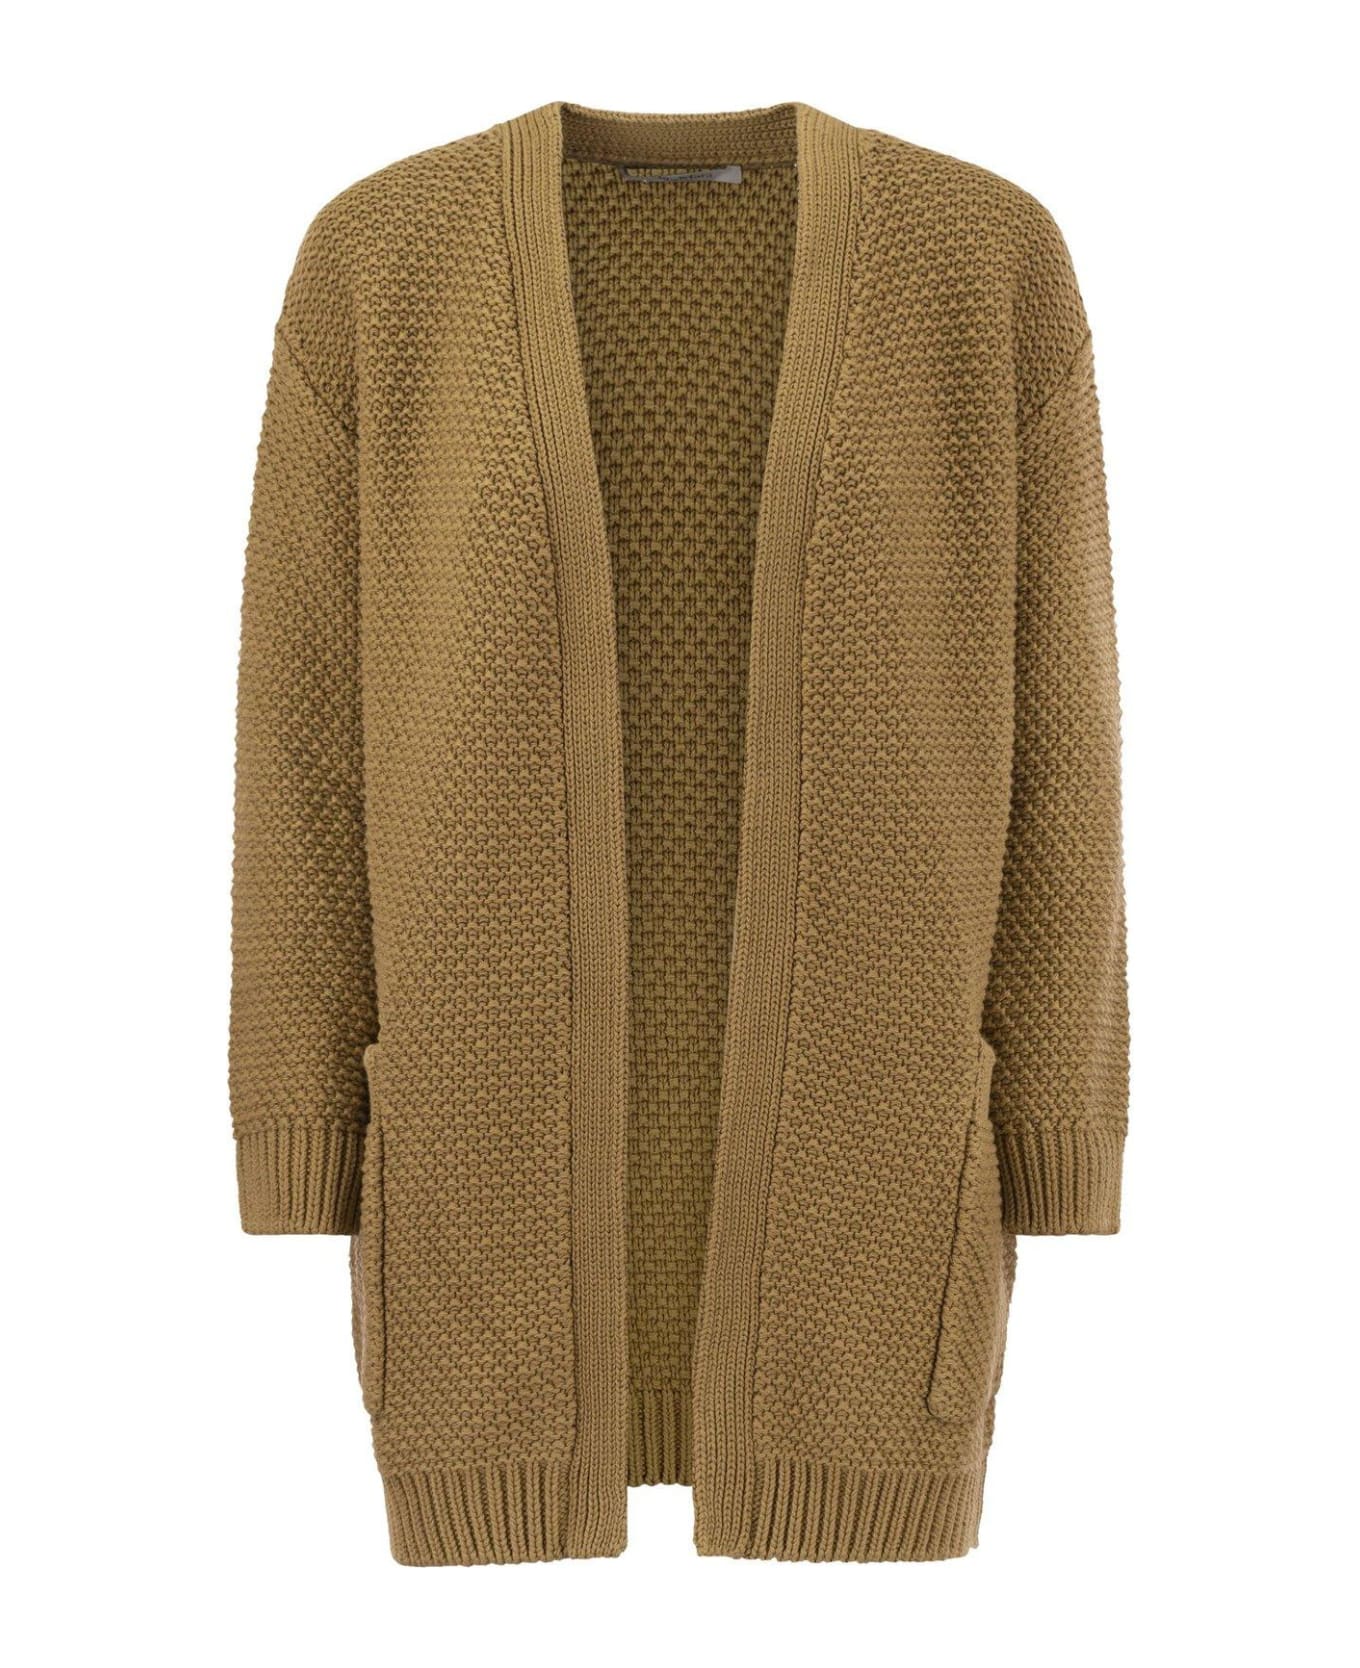 Max Mara Open-front Knit Cardigan - Leather Brown カーディガン